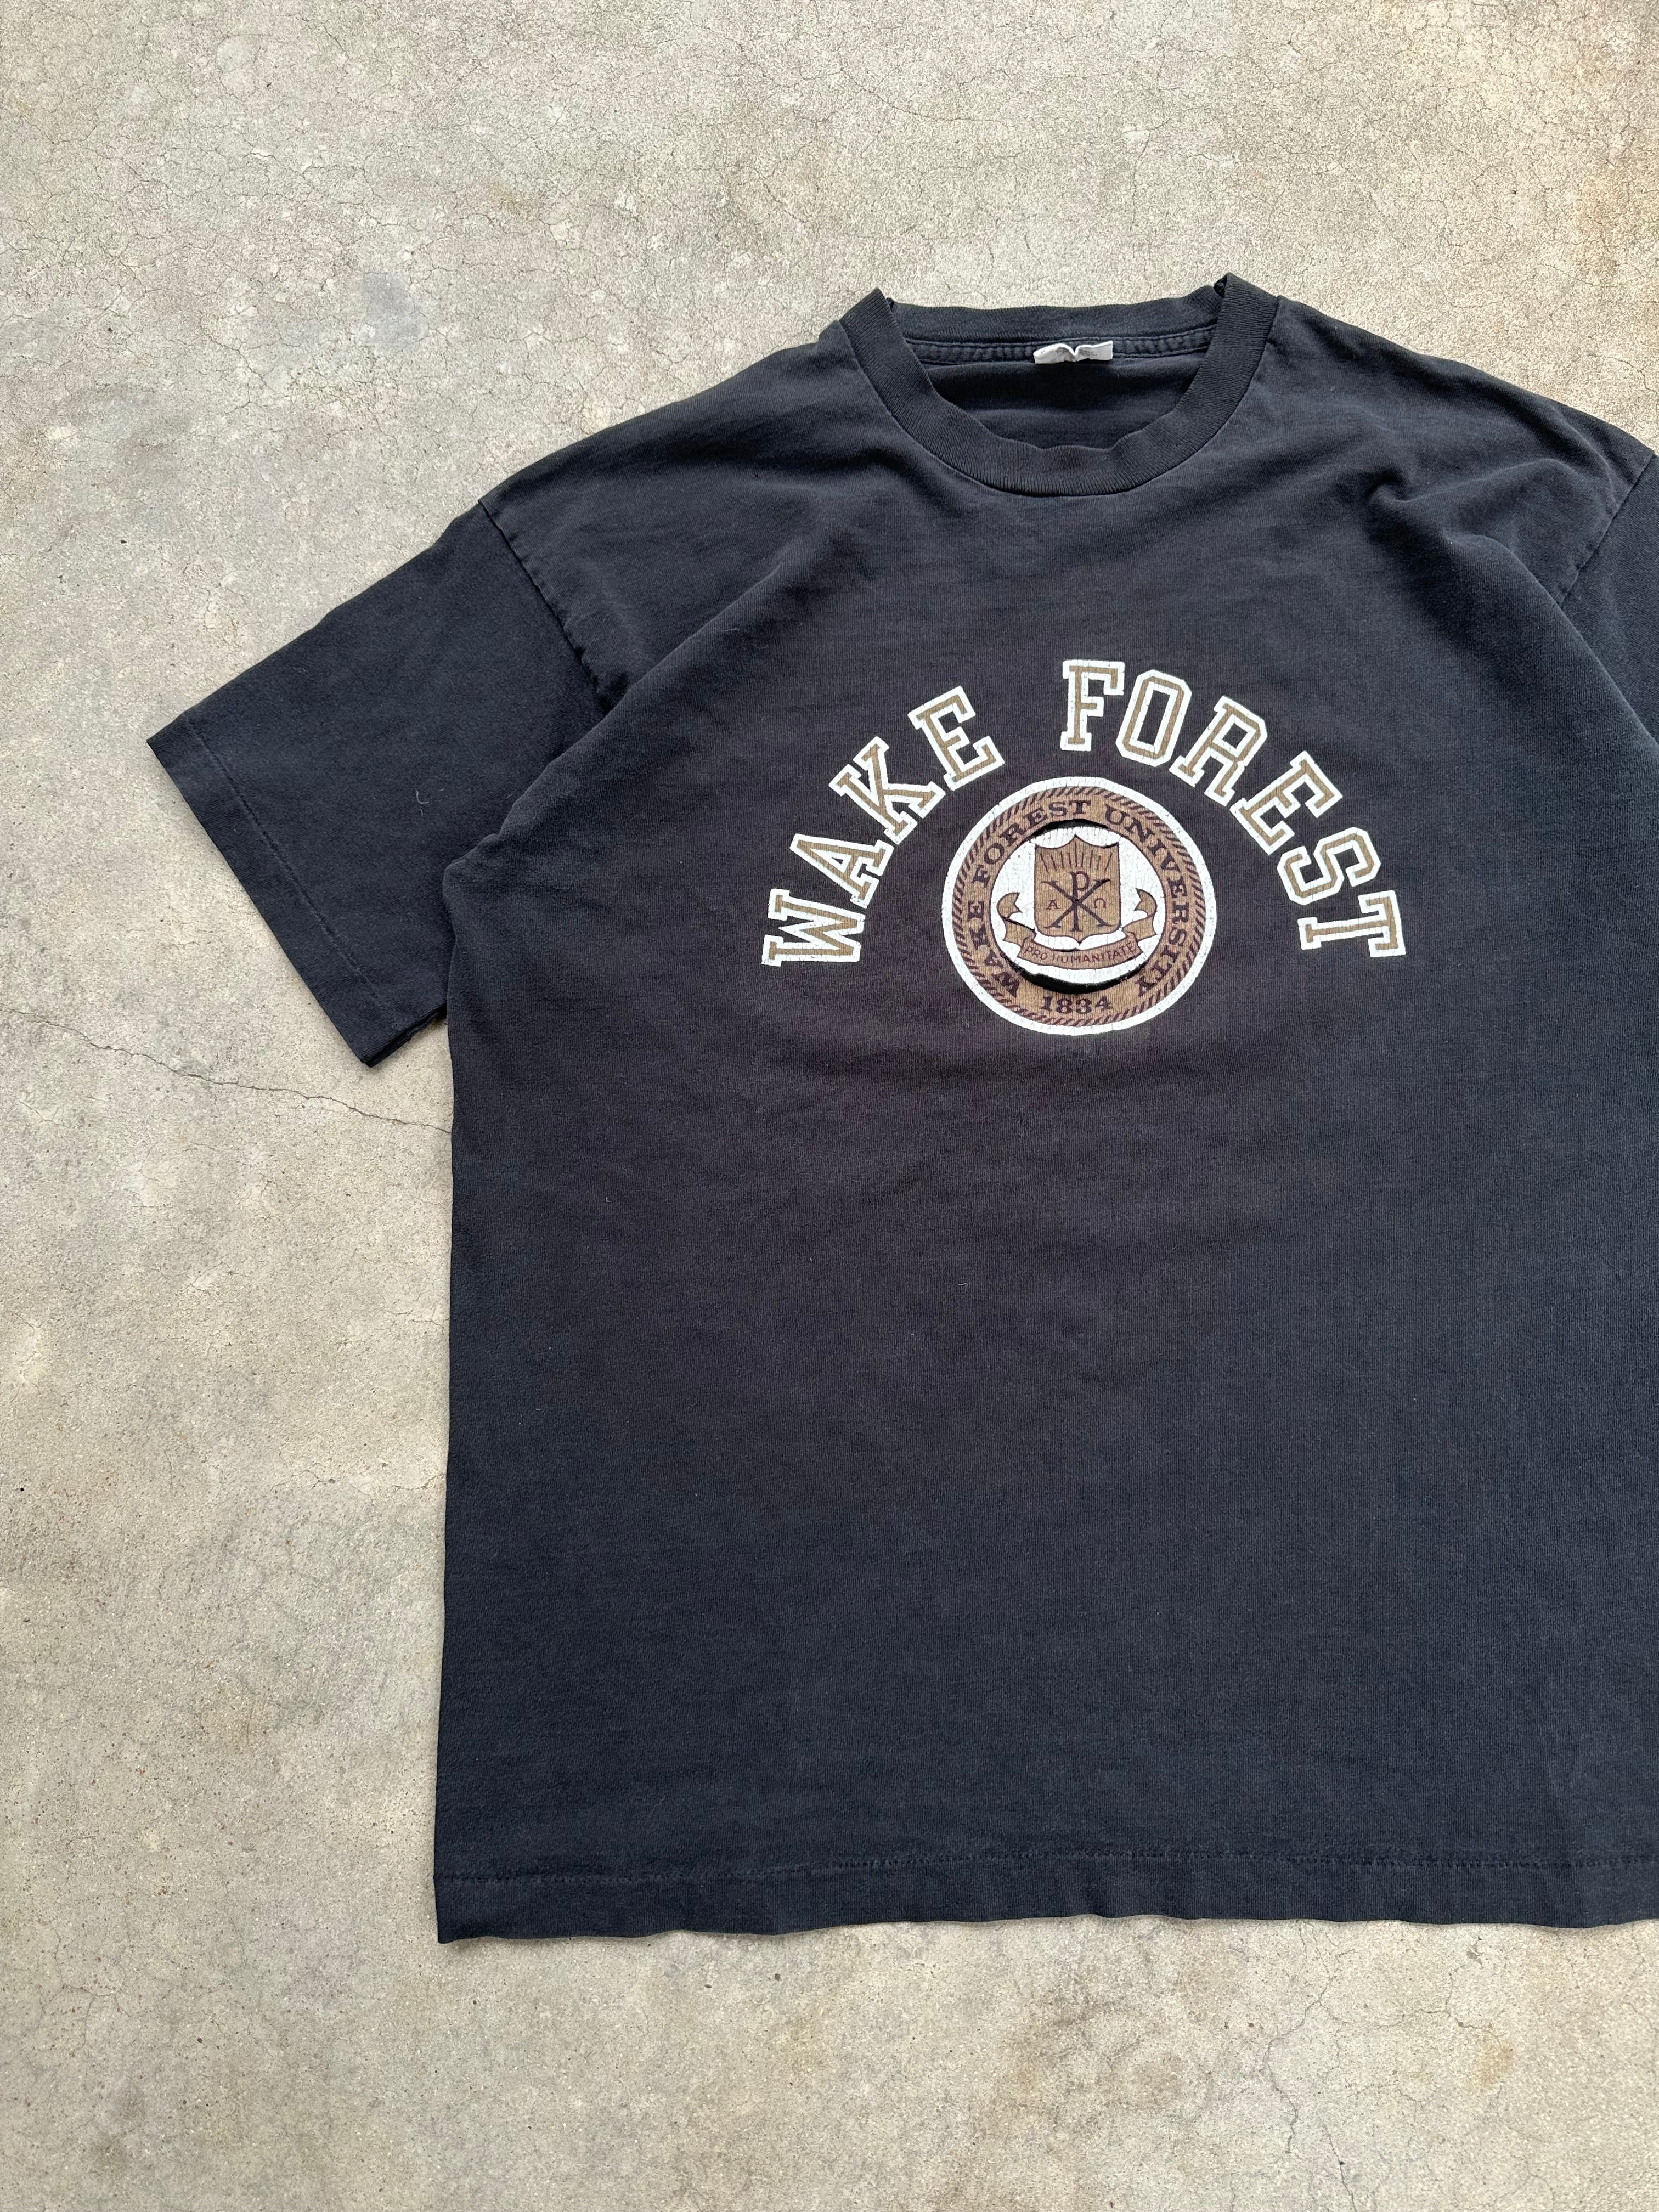 1990s Distressed Wake Forest T-Shirt (XL)